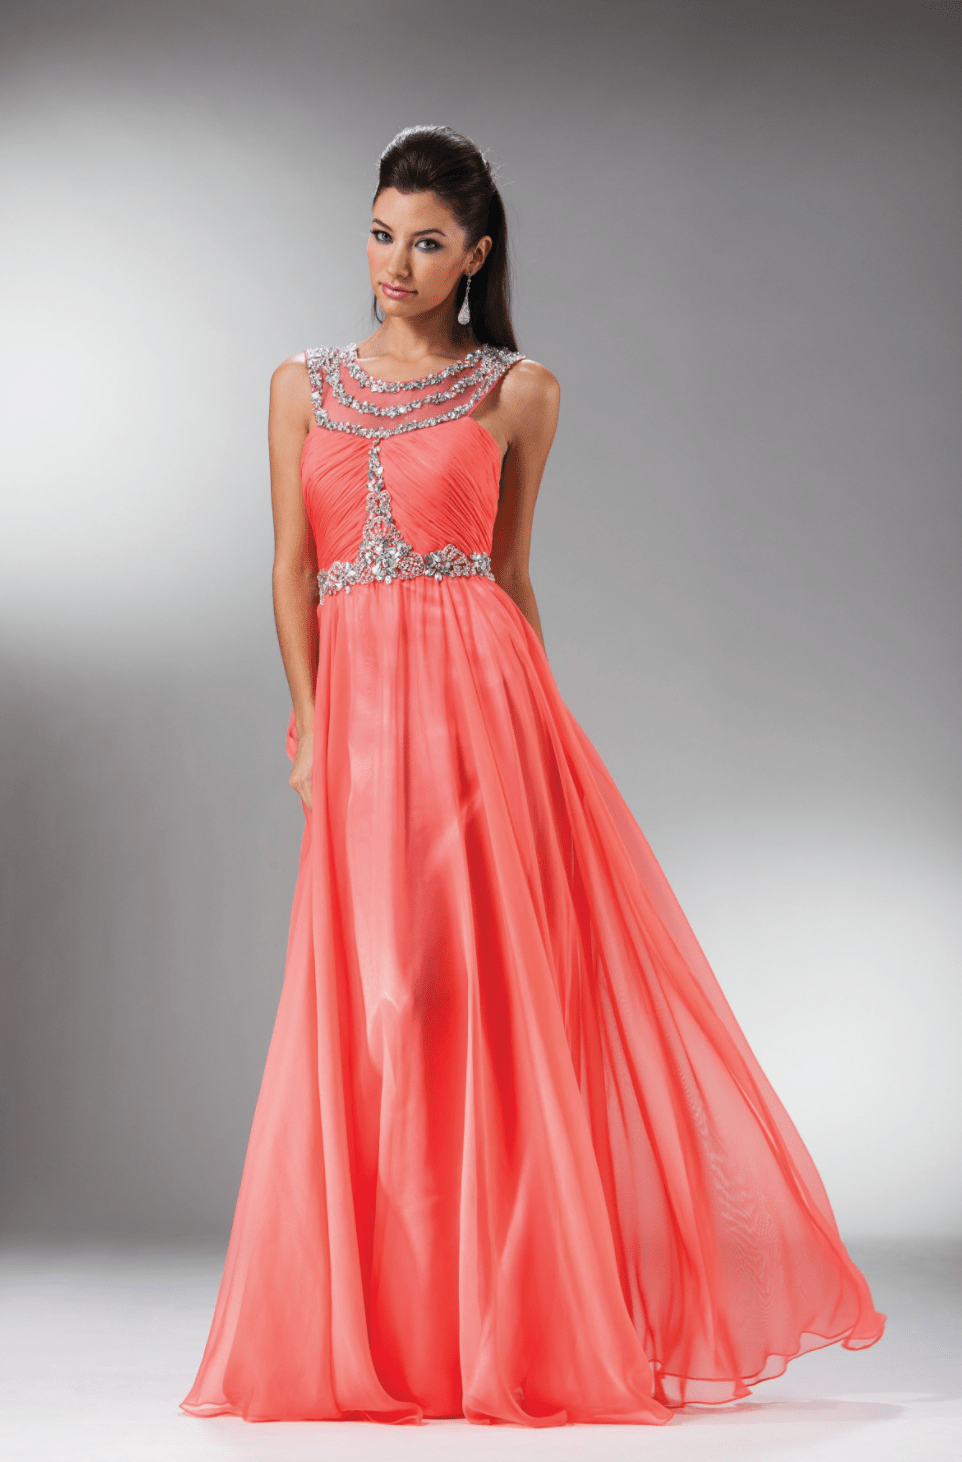 Crystal & Sheer Flowing Chiffon Long Dress By Cinderella Divine - NORMA REED